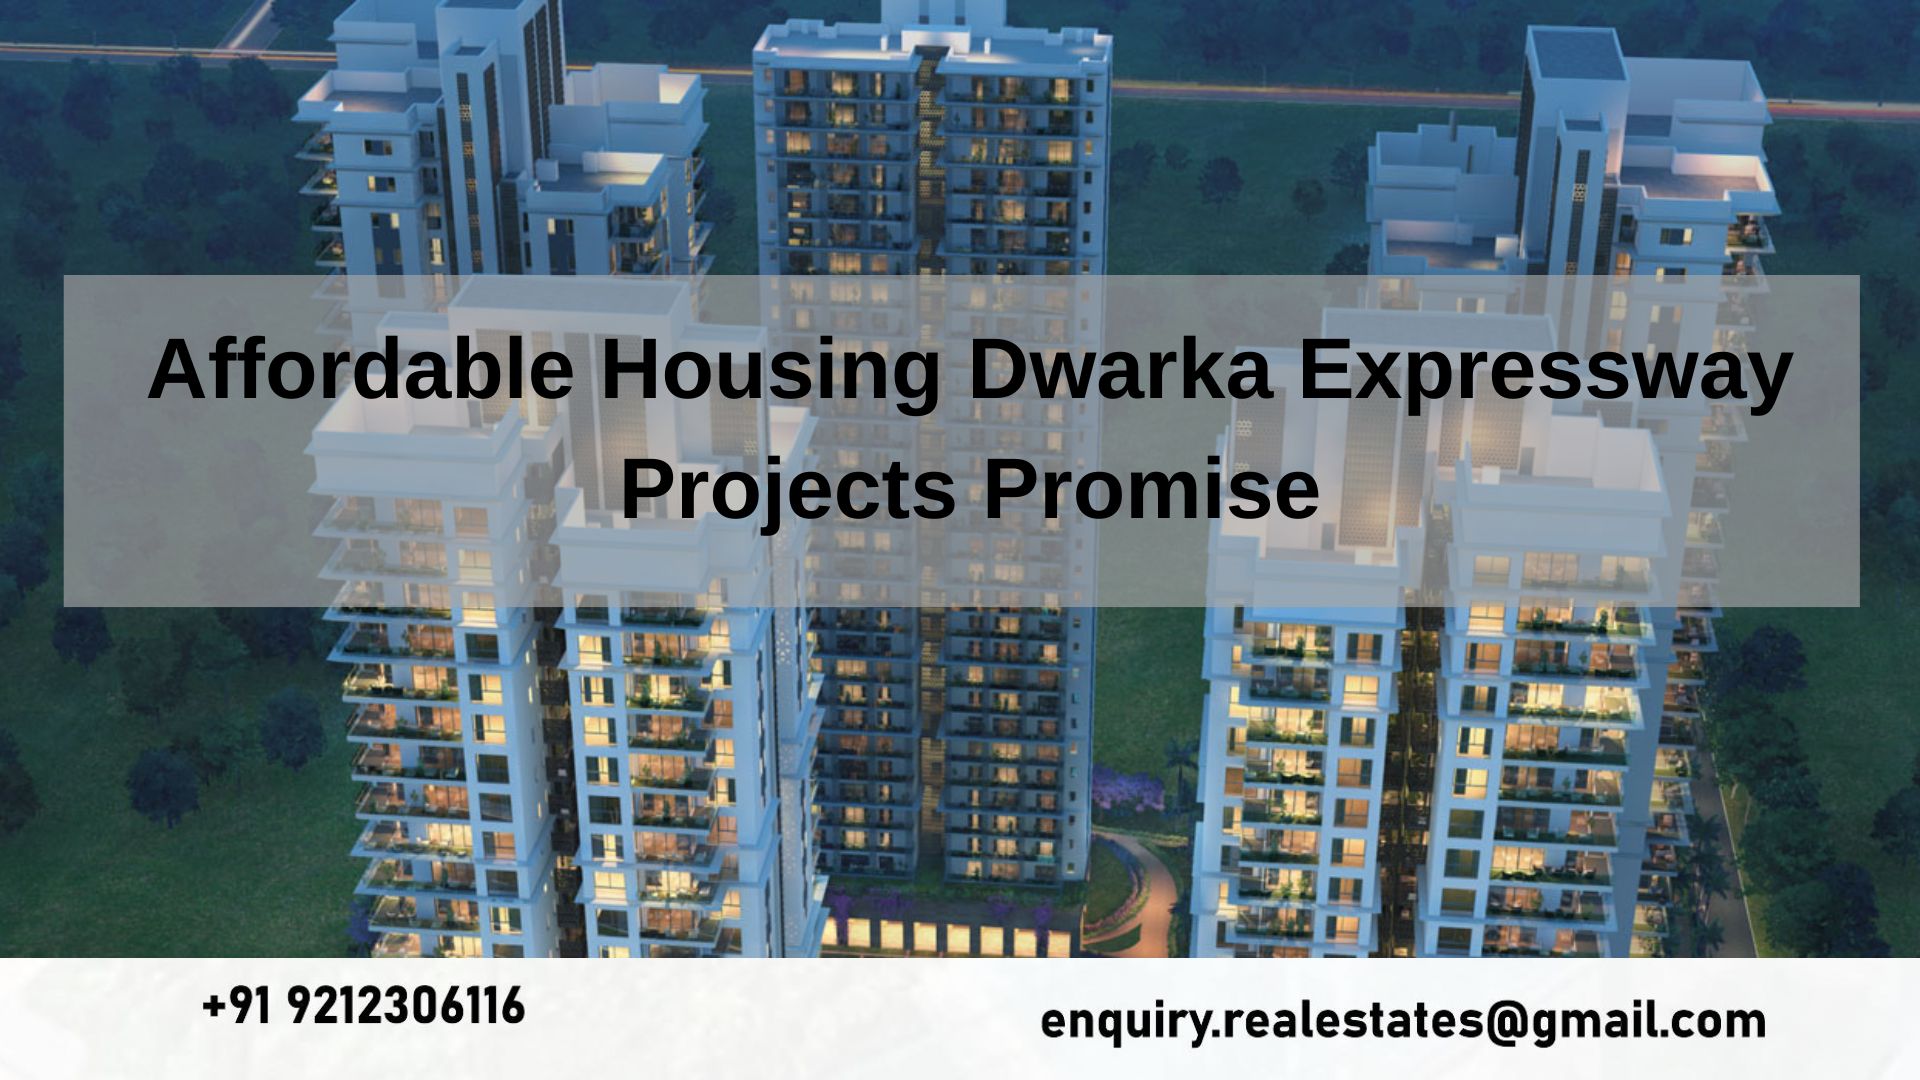 Affordable Housing Dwarka Expressway Projects Promise